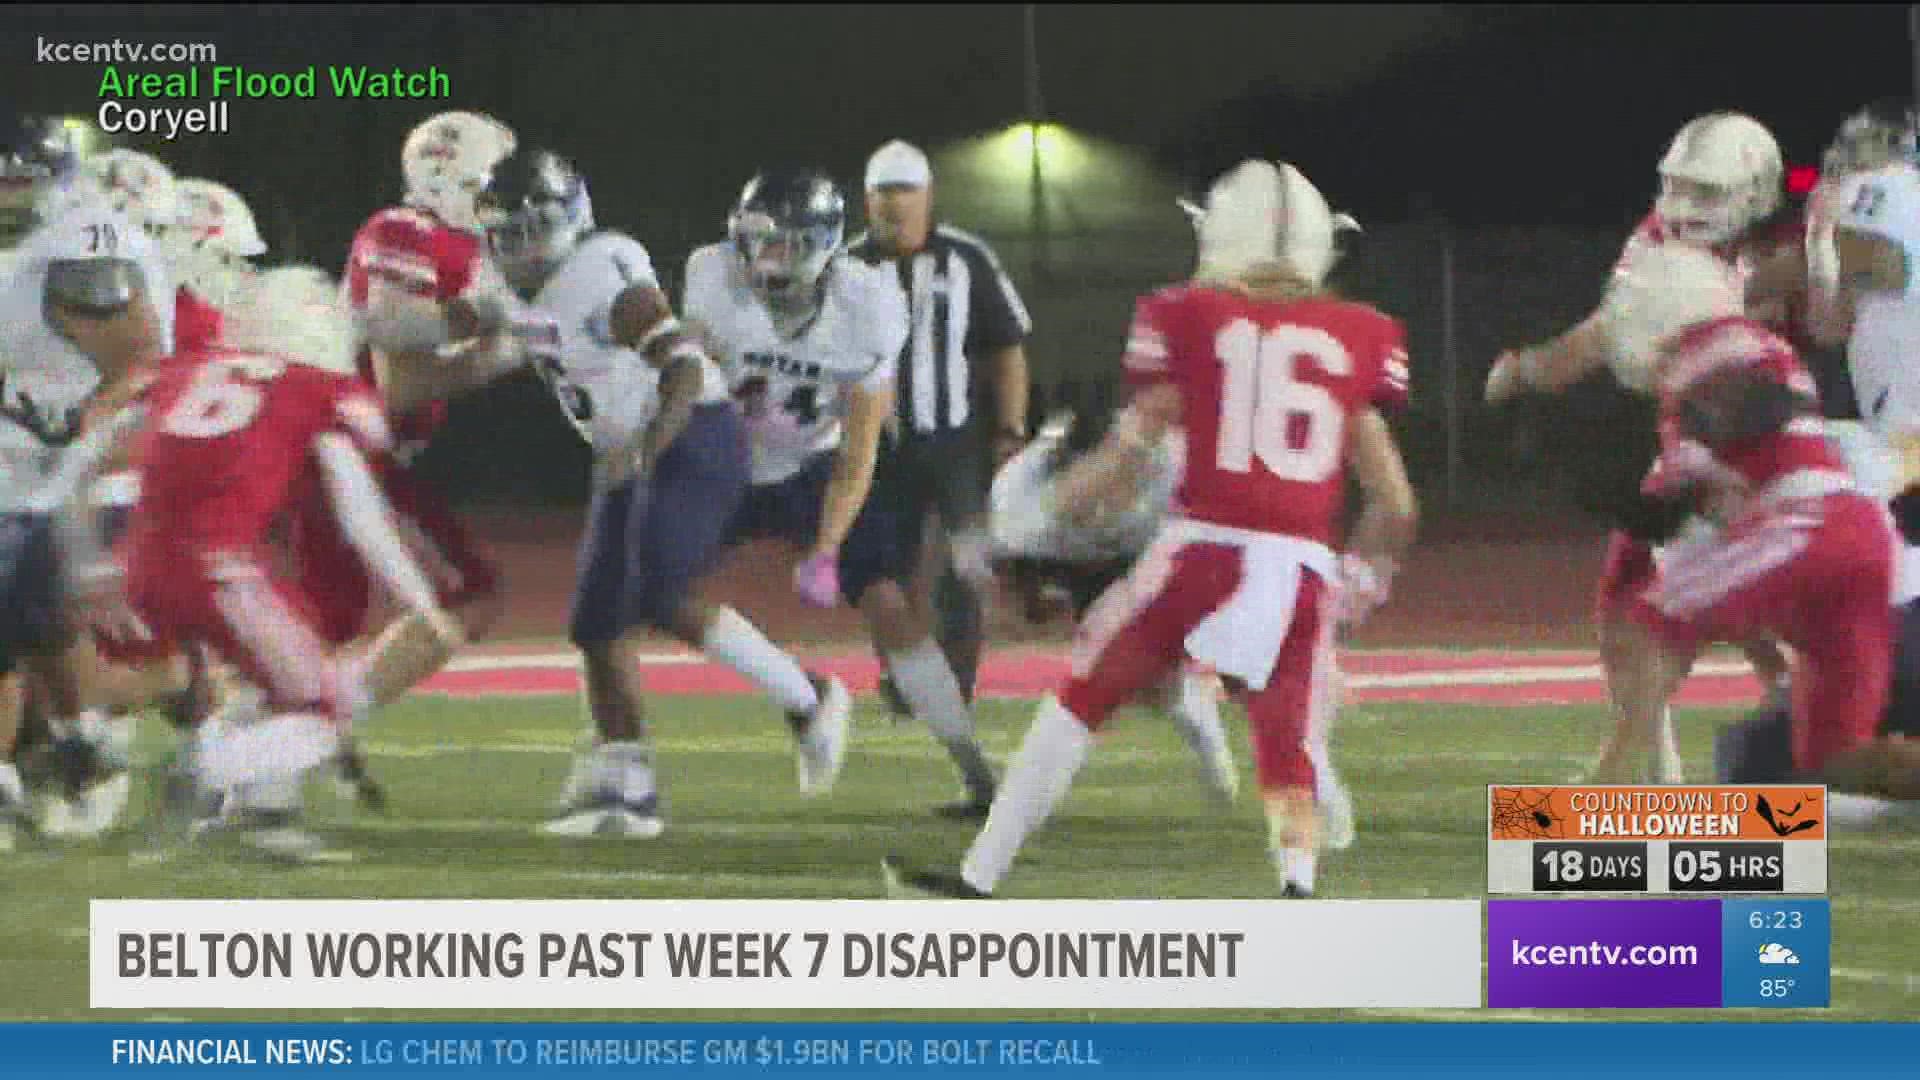 The Tigers aren't thrilled with their performance against Harker Heights, but their head coach is telling the team to learn from it and move forward.